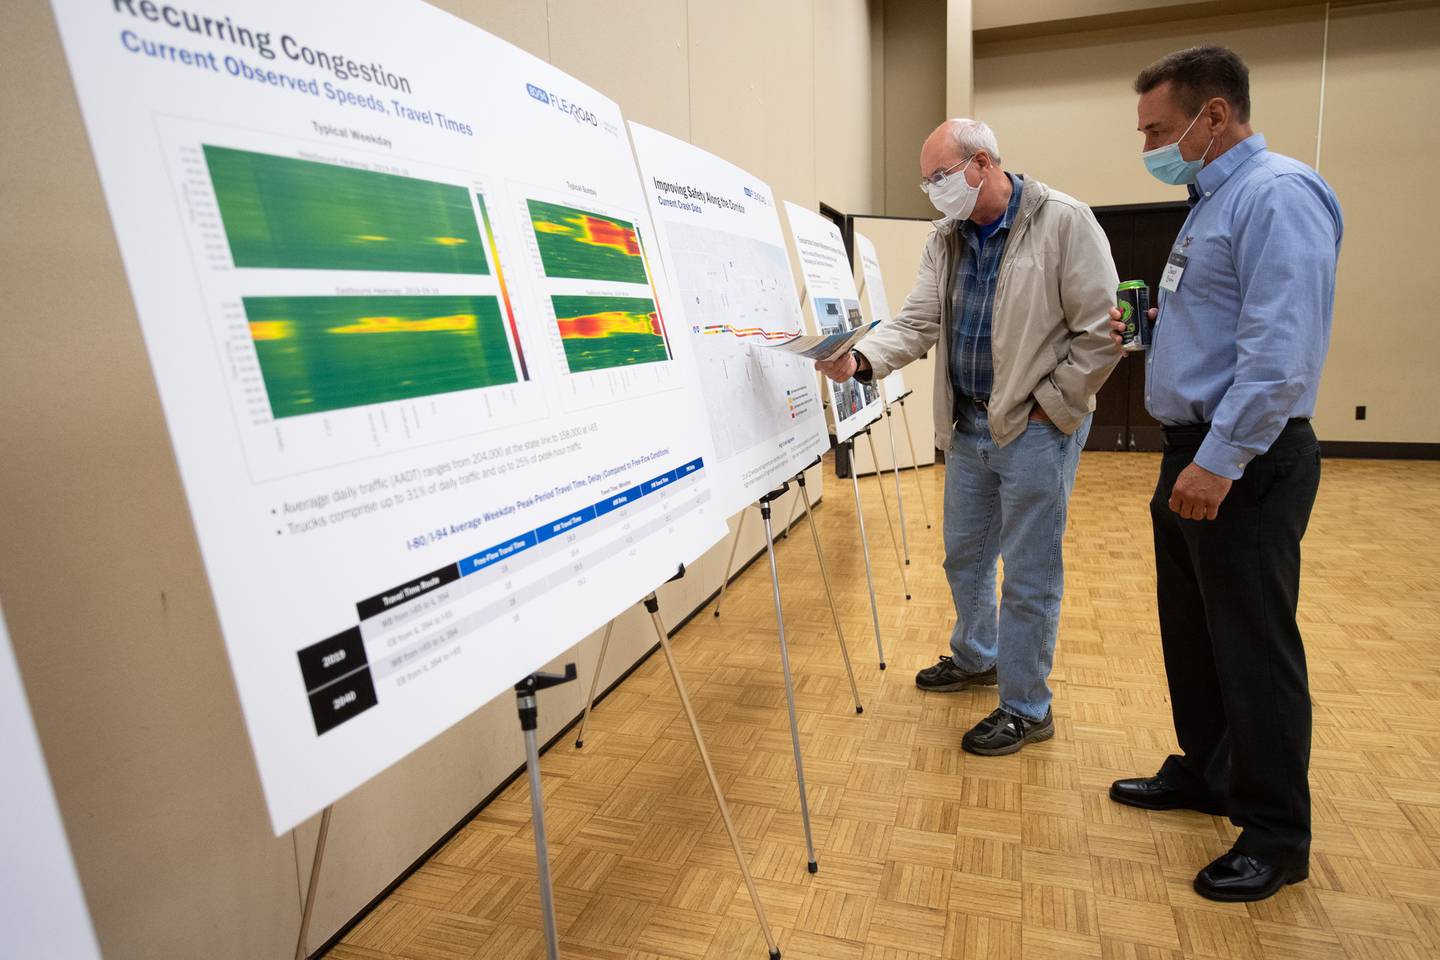 Hammond resident Dave Holeman, on left, speaks with Parsons Corporation vice president Joseph Brahm during a public meeting to gather input for a traffic study of the Borman Expressway at Purdue University Northwest in Hammond on Tuesday, October 19, 2021. (Kyle Telechan / Post-Tribune)